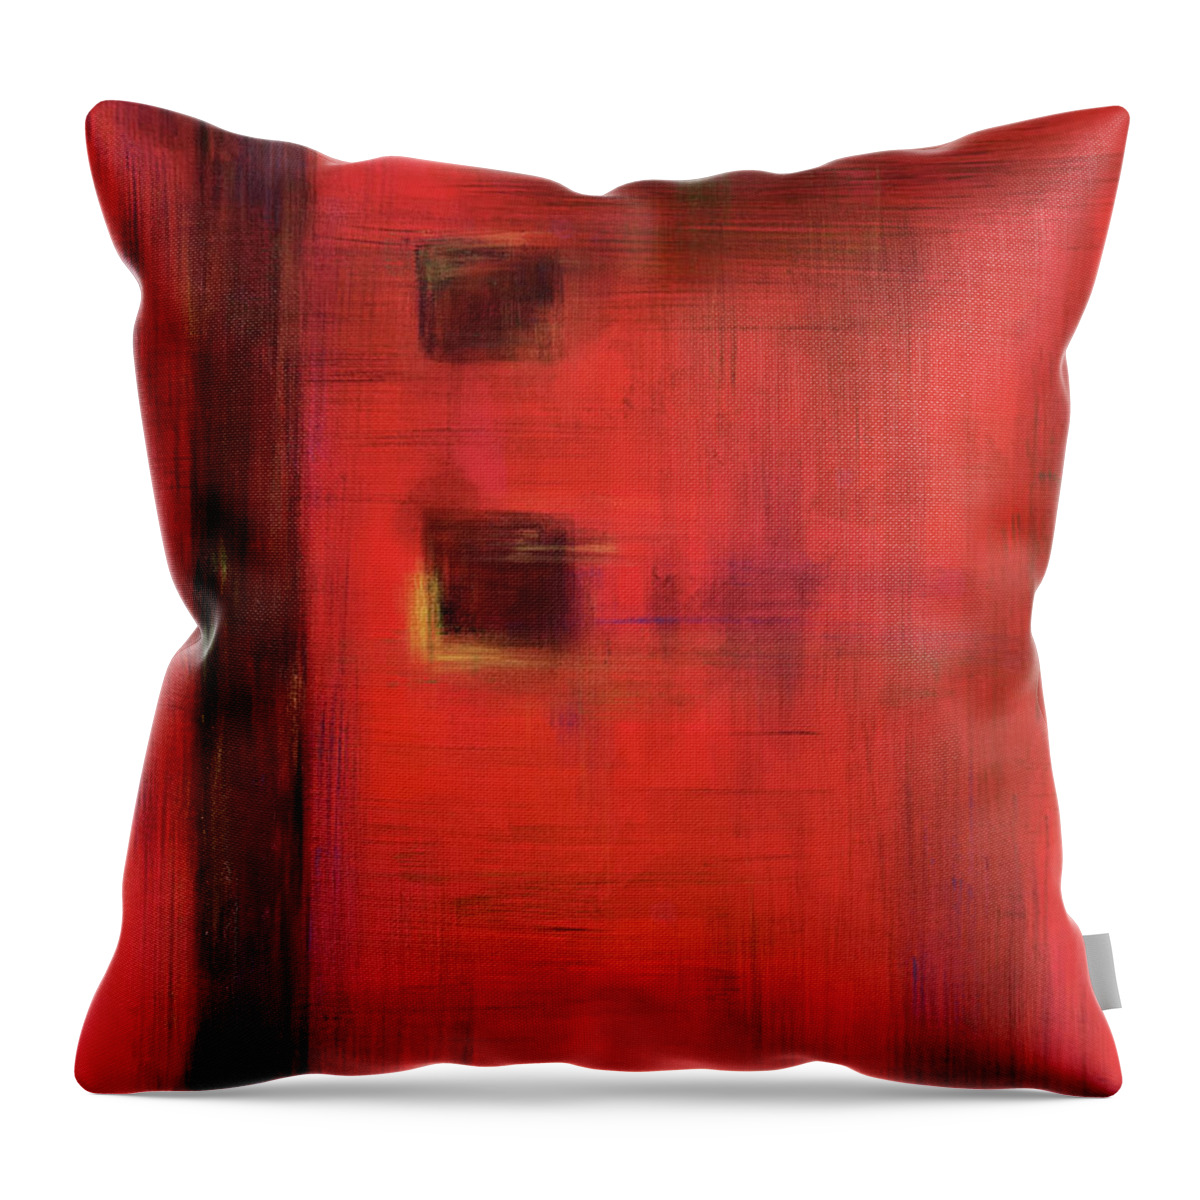 Abstract Throw Pillow featuring the painting Harmony by Tes Scholtz